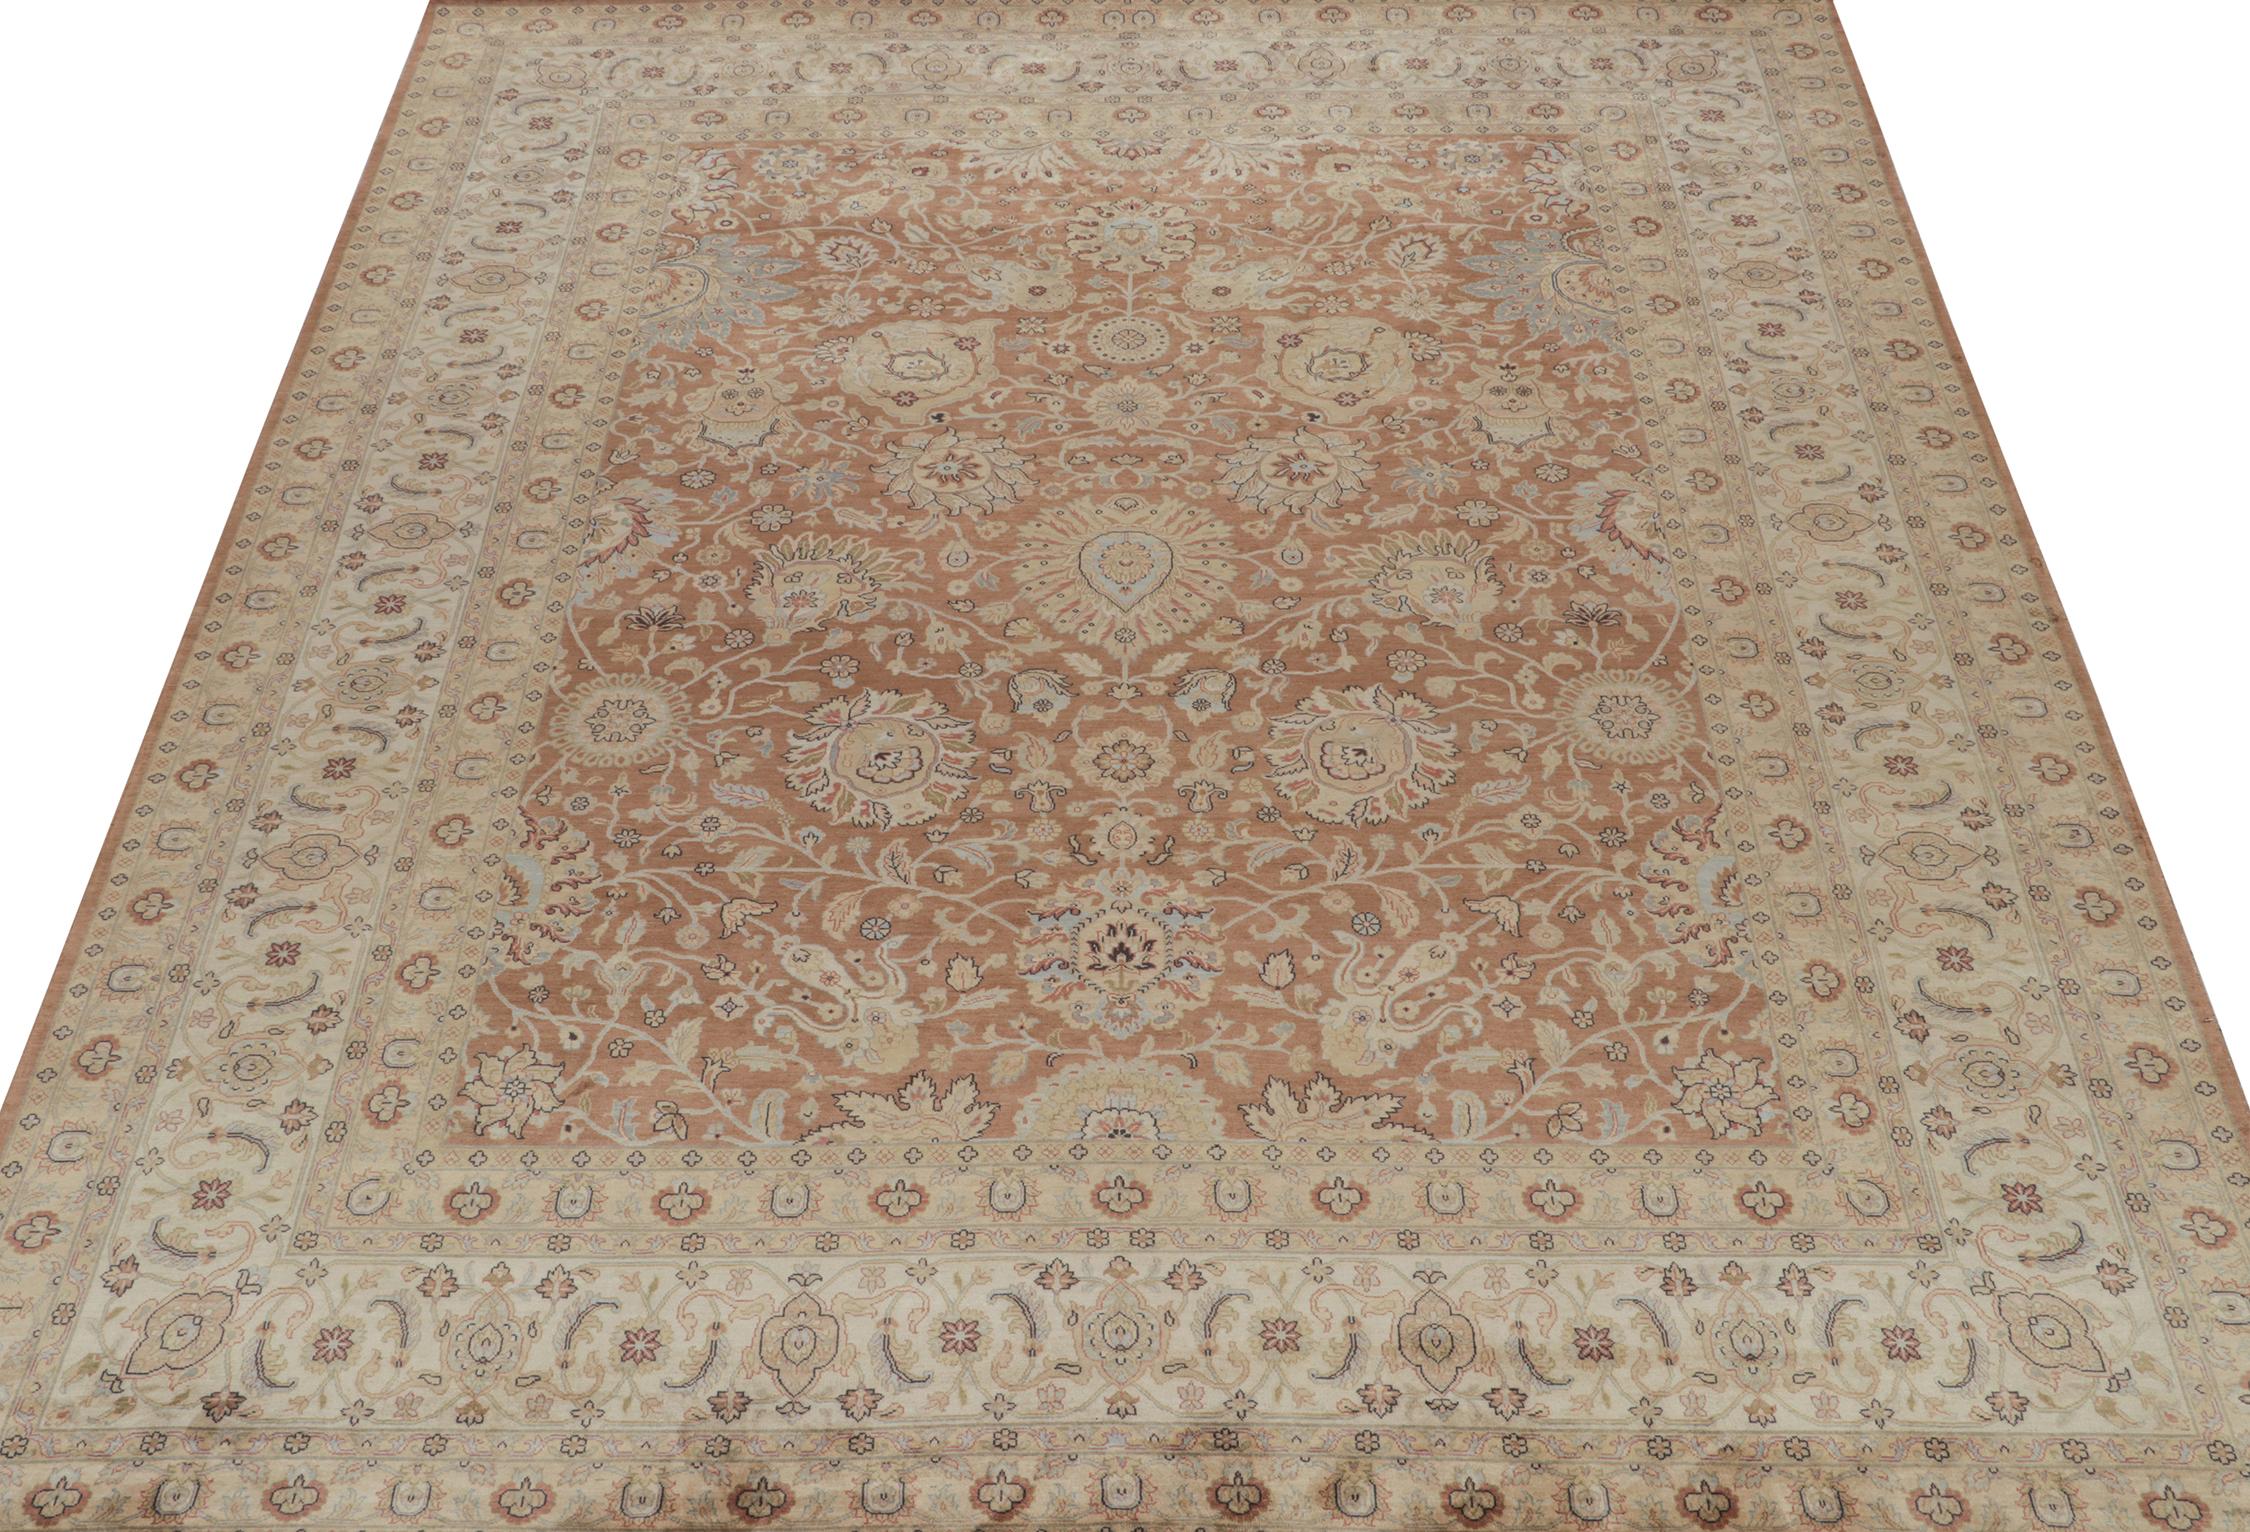 Indian Rug & Kilim’s Persian Tabriz Style Rug in Rust, Brown and Blue Floral Pattern For Sale